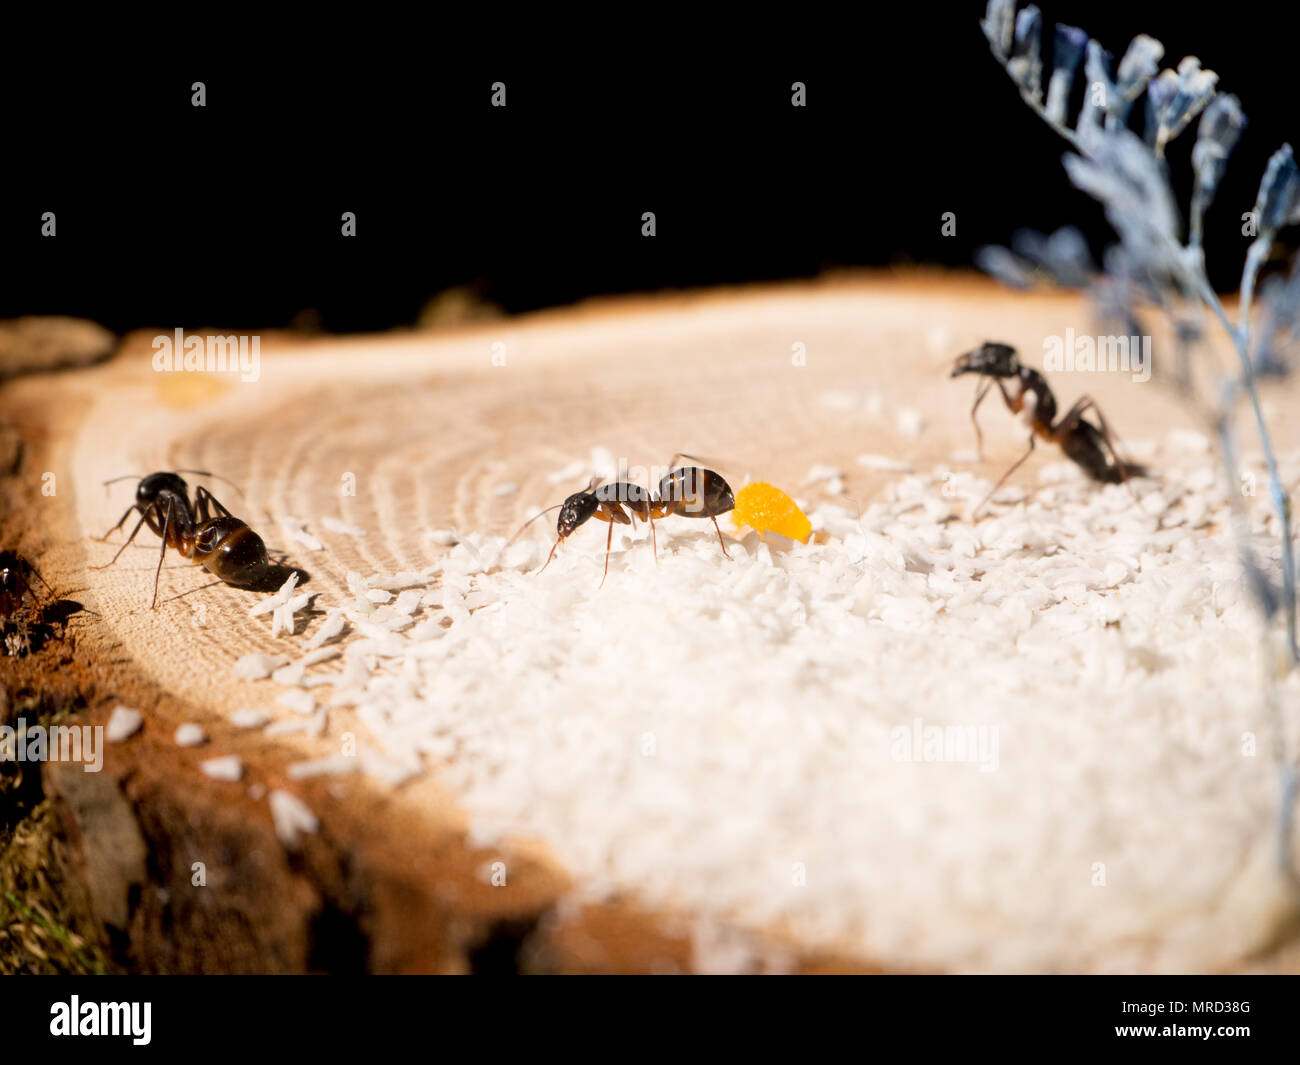 group ants on a wooden cut, white chips Stock Photo